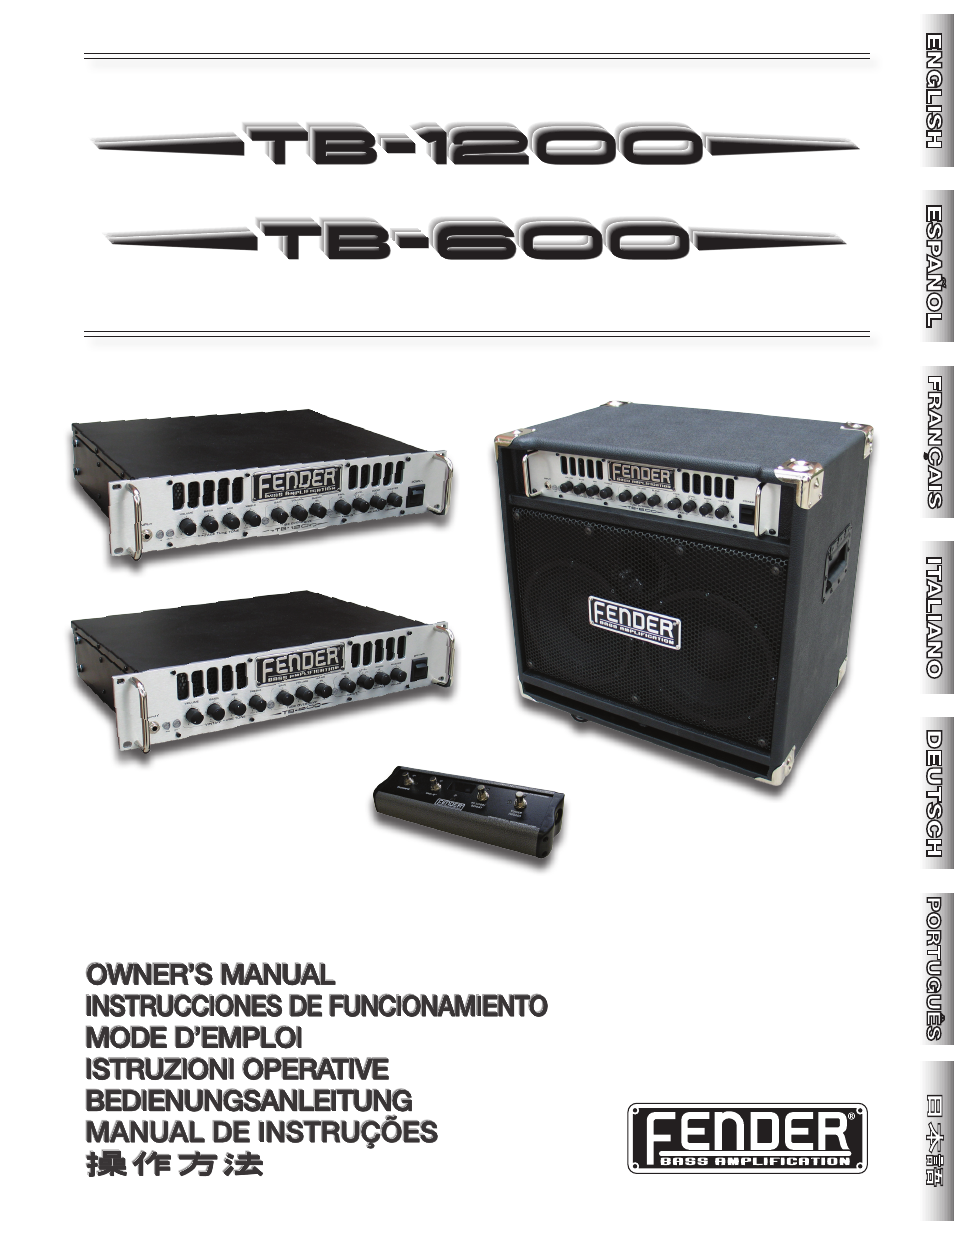 Fender TB-1200 User Manual | 36 pages